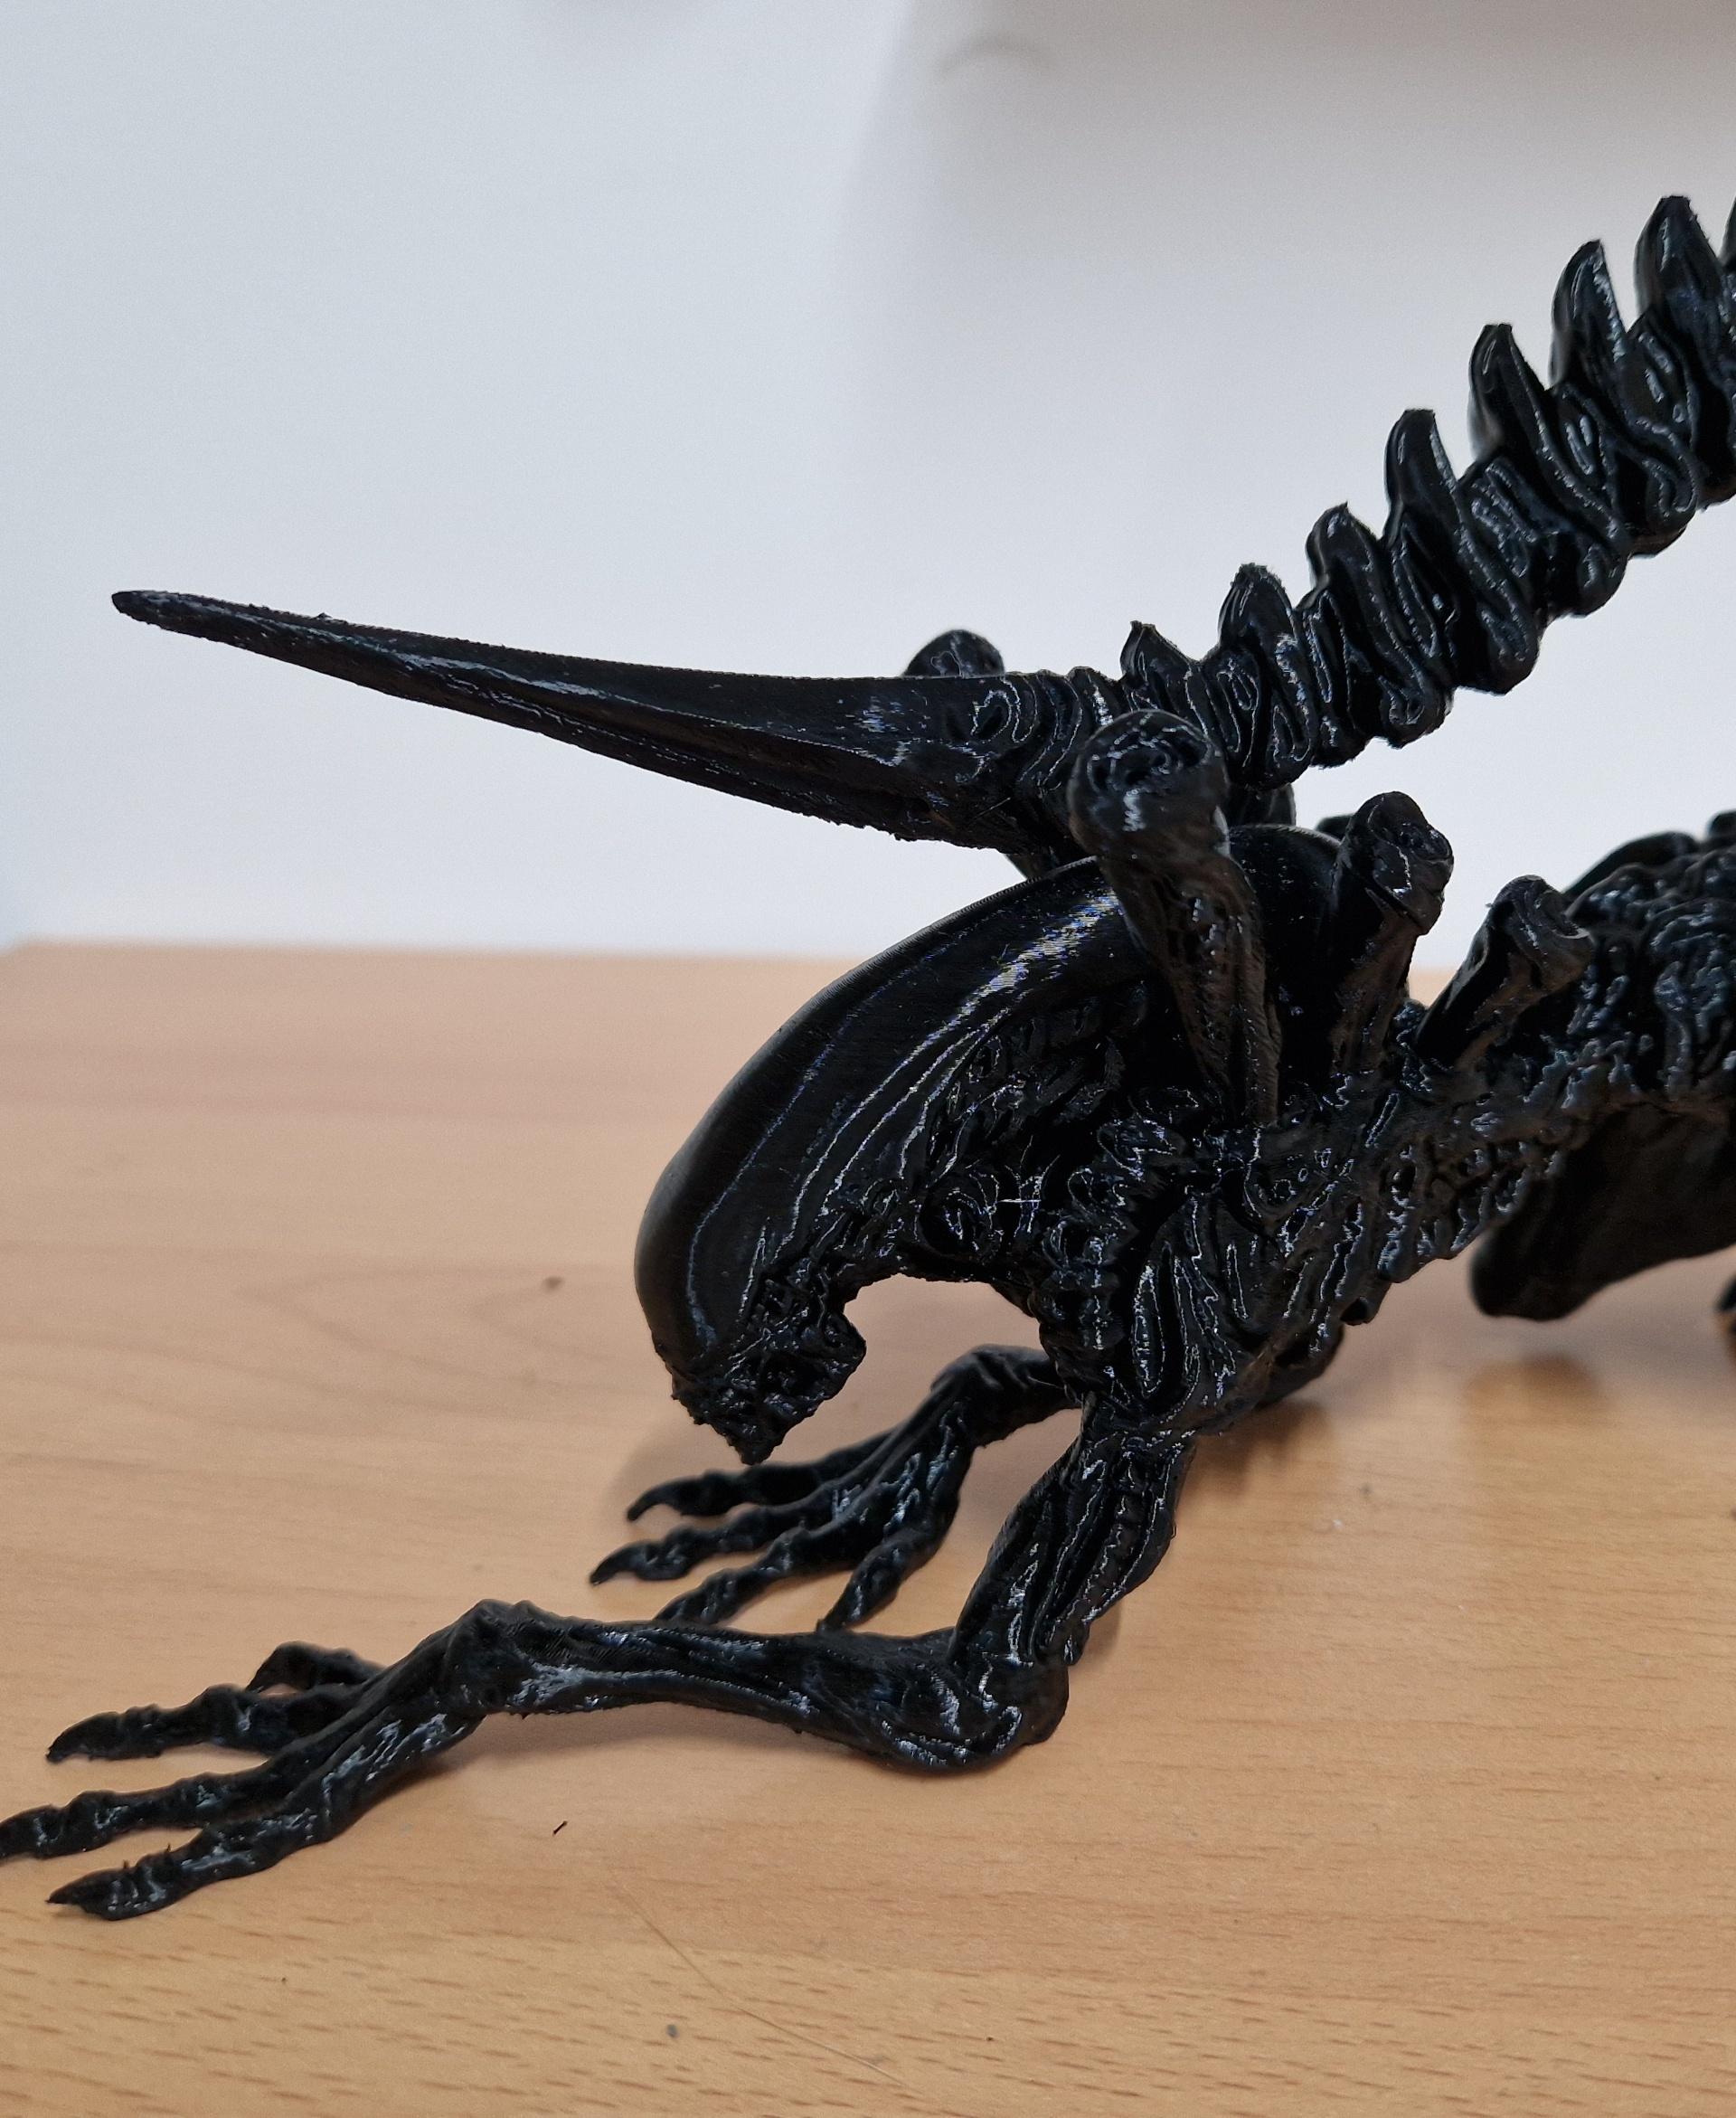 Alien  - Setup: BL P1S using black eSUN PETG, with a 0.16mm layer, sliced in BambuStudio with added organic supports. Print took 15hrs, and used 129g

After many hours tweaking a Benchy for this filament, I was happy enough to print this amazing model!

The supports were a pain to remove, but that was caused by the layer adhesion properties of PETG. I wanted to use this material to give strength and a shiny finish.

The model is great, even if the STL file shows alot of surface tessellation. It didn't show on the final print.

If anyone is interested in the filament and process configs, let me know. - 3d model